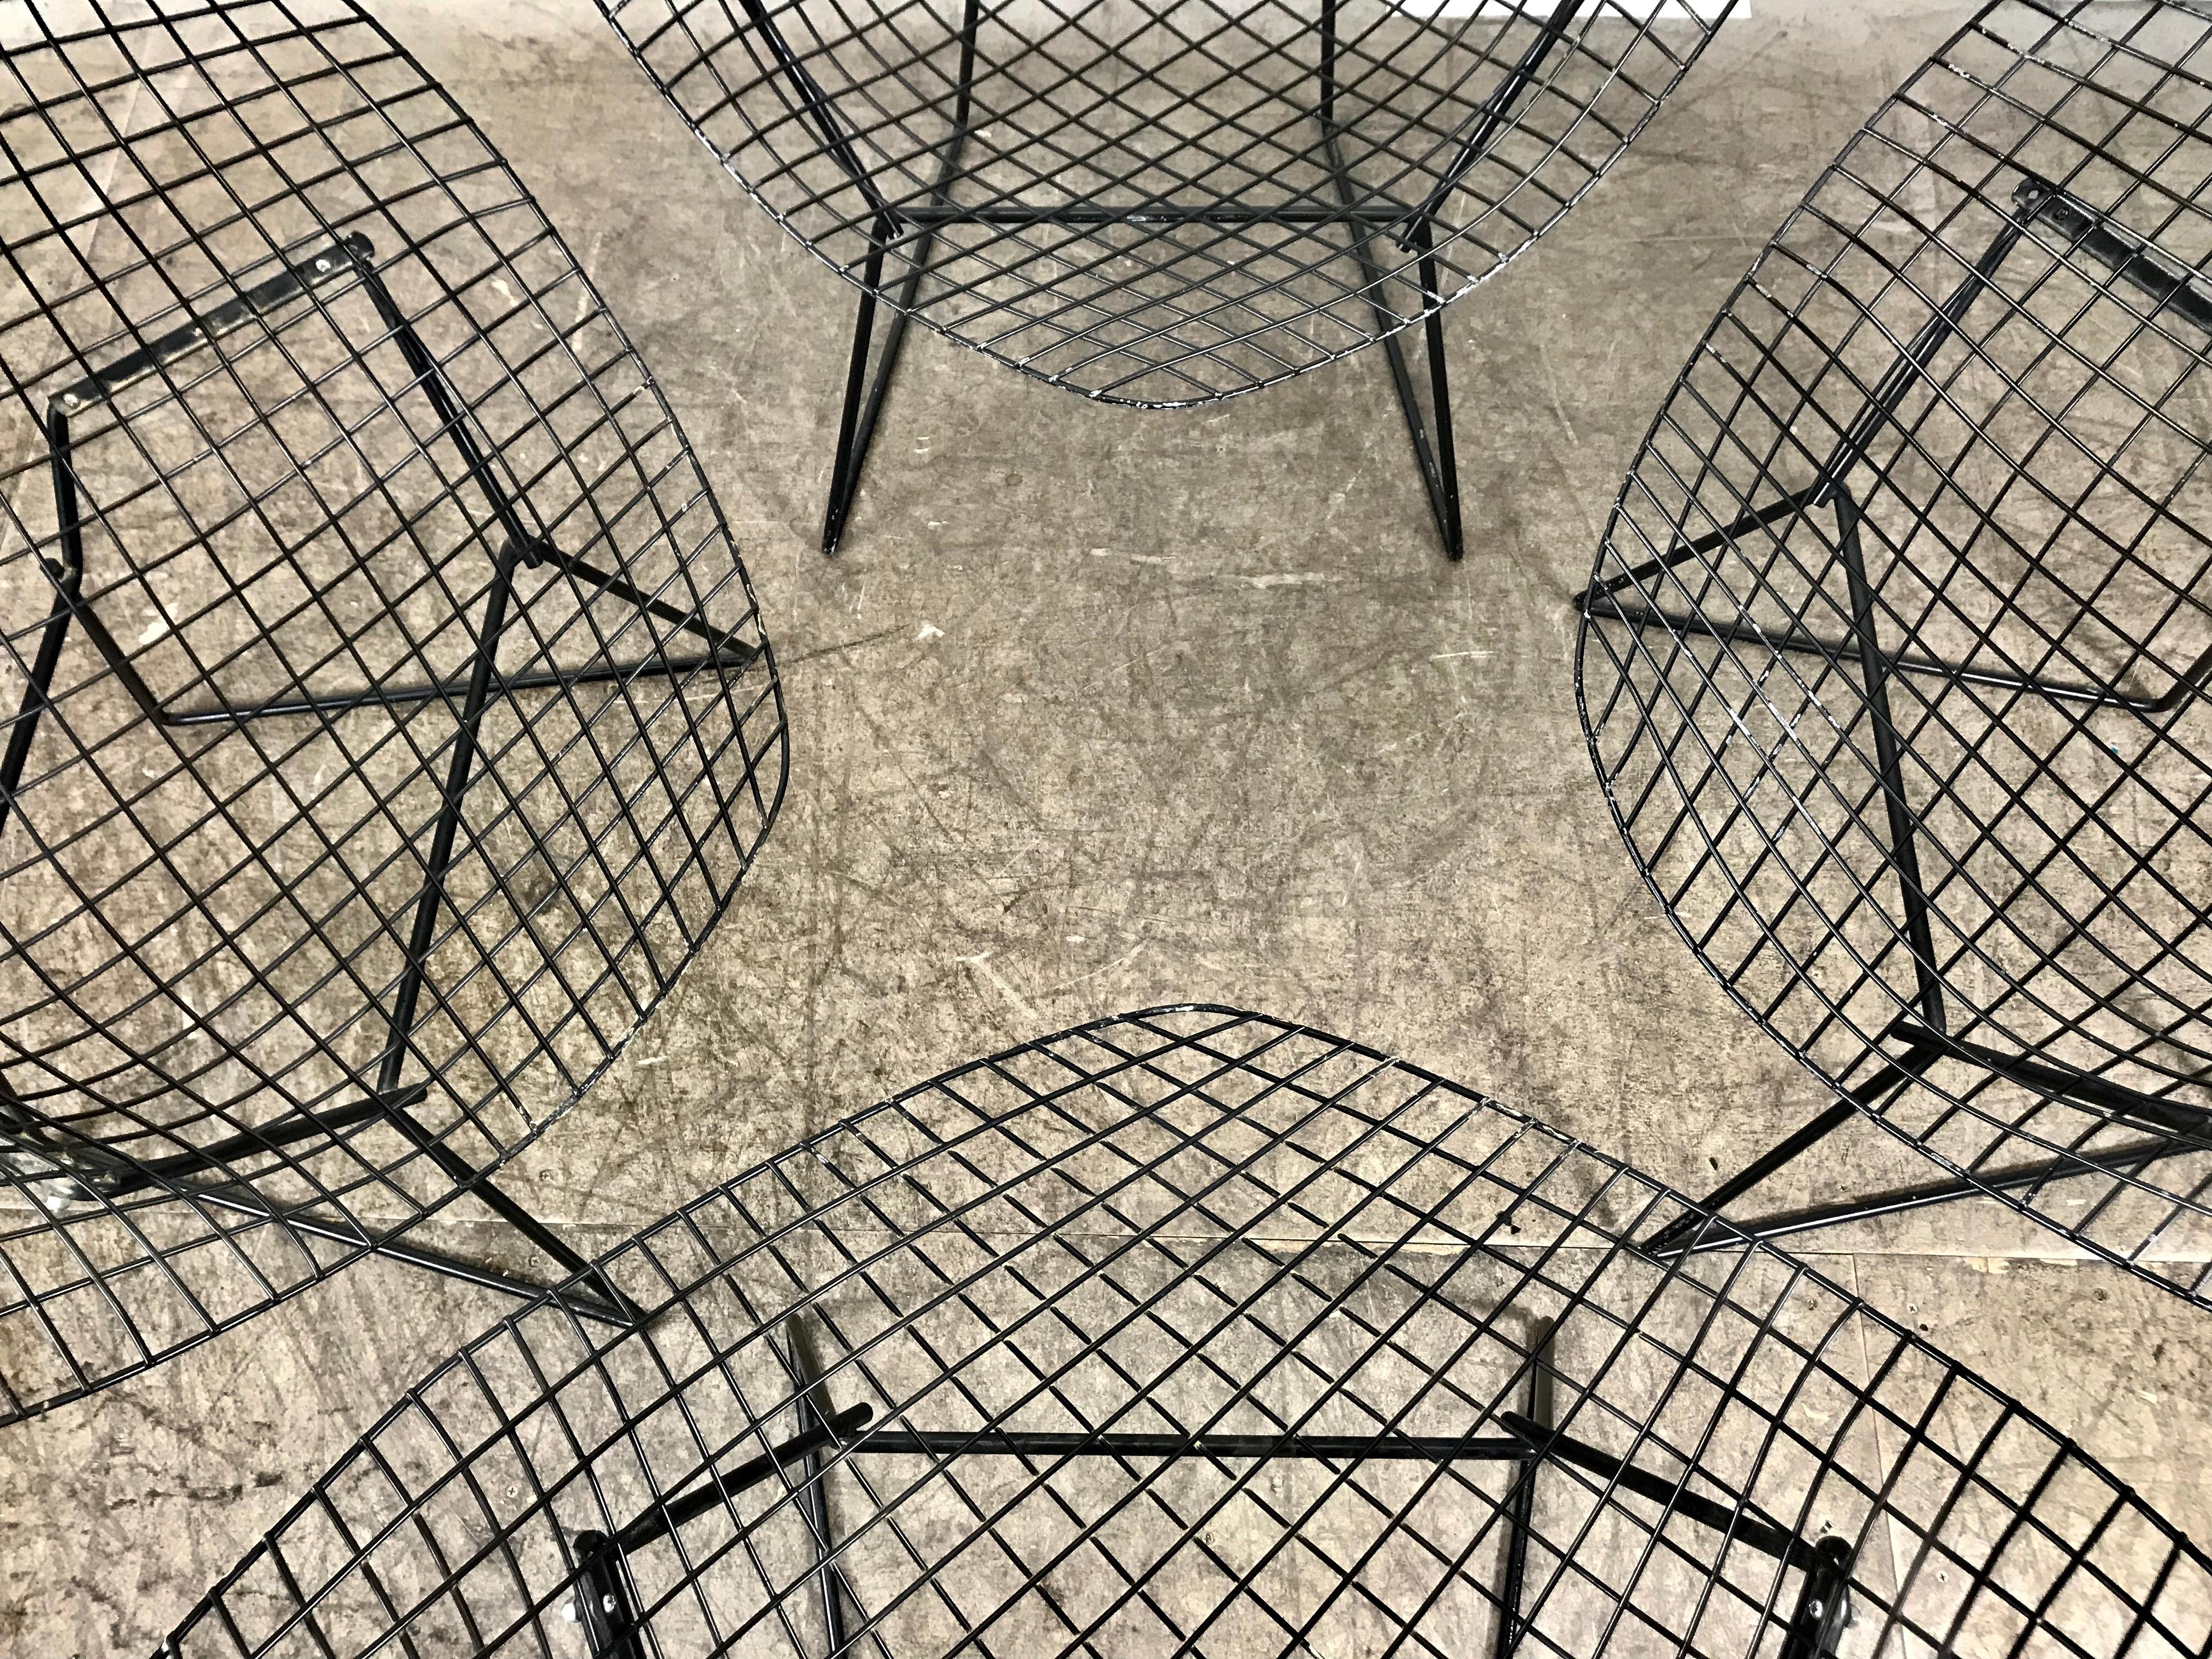 American Matched Set of 4 Midcentury Bertoia Diamond Chairs, Knoll